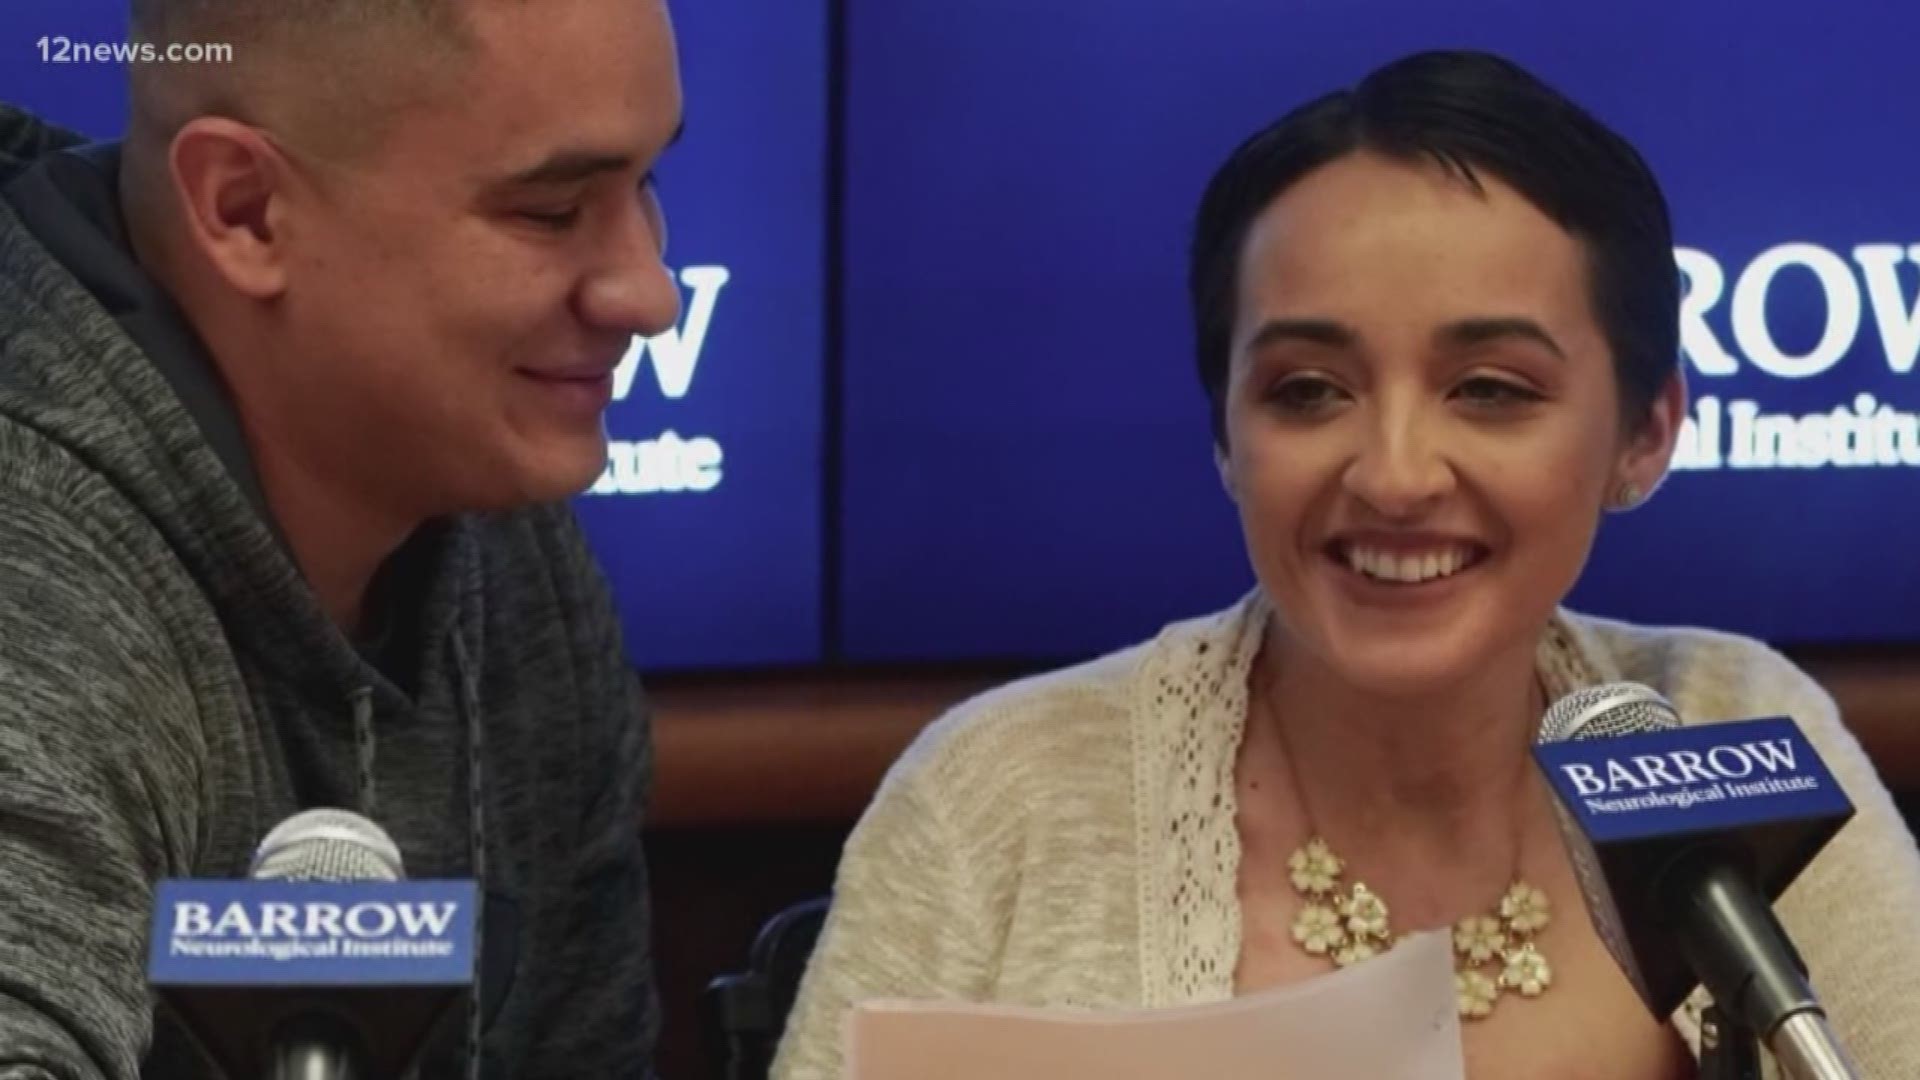 Francisco and Jovanna Calzadillas spoke to the media at Barrow Neurological Institute in Phoenix about Jovanna's recovery and anticipation of getting back to their new normal.